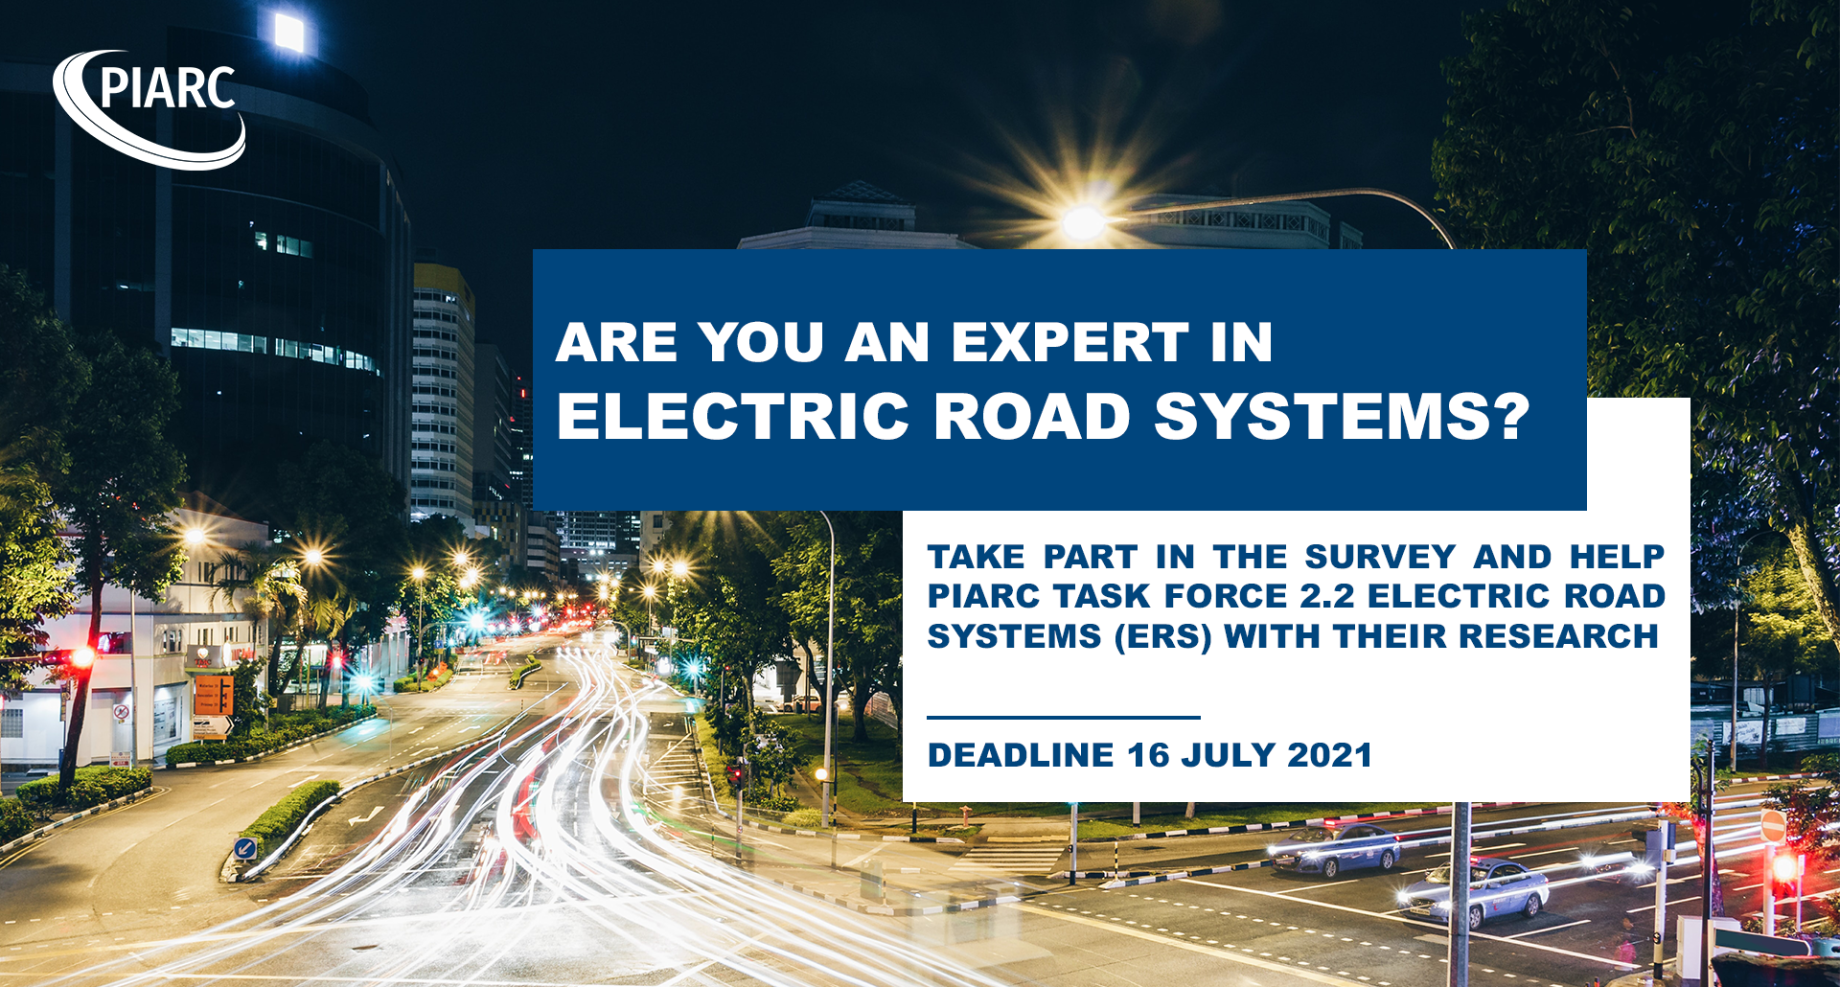 Share your knowledge on Electric road Systems and help PIARC's Task Force 2.2 through this short survey